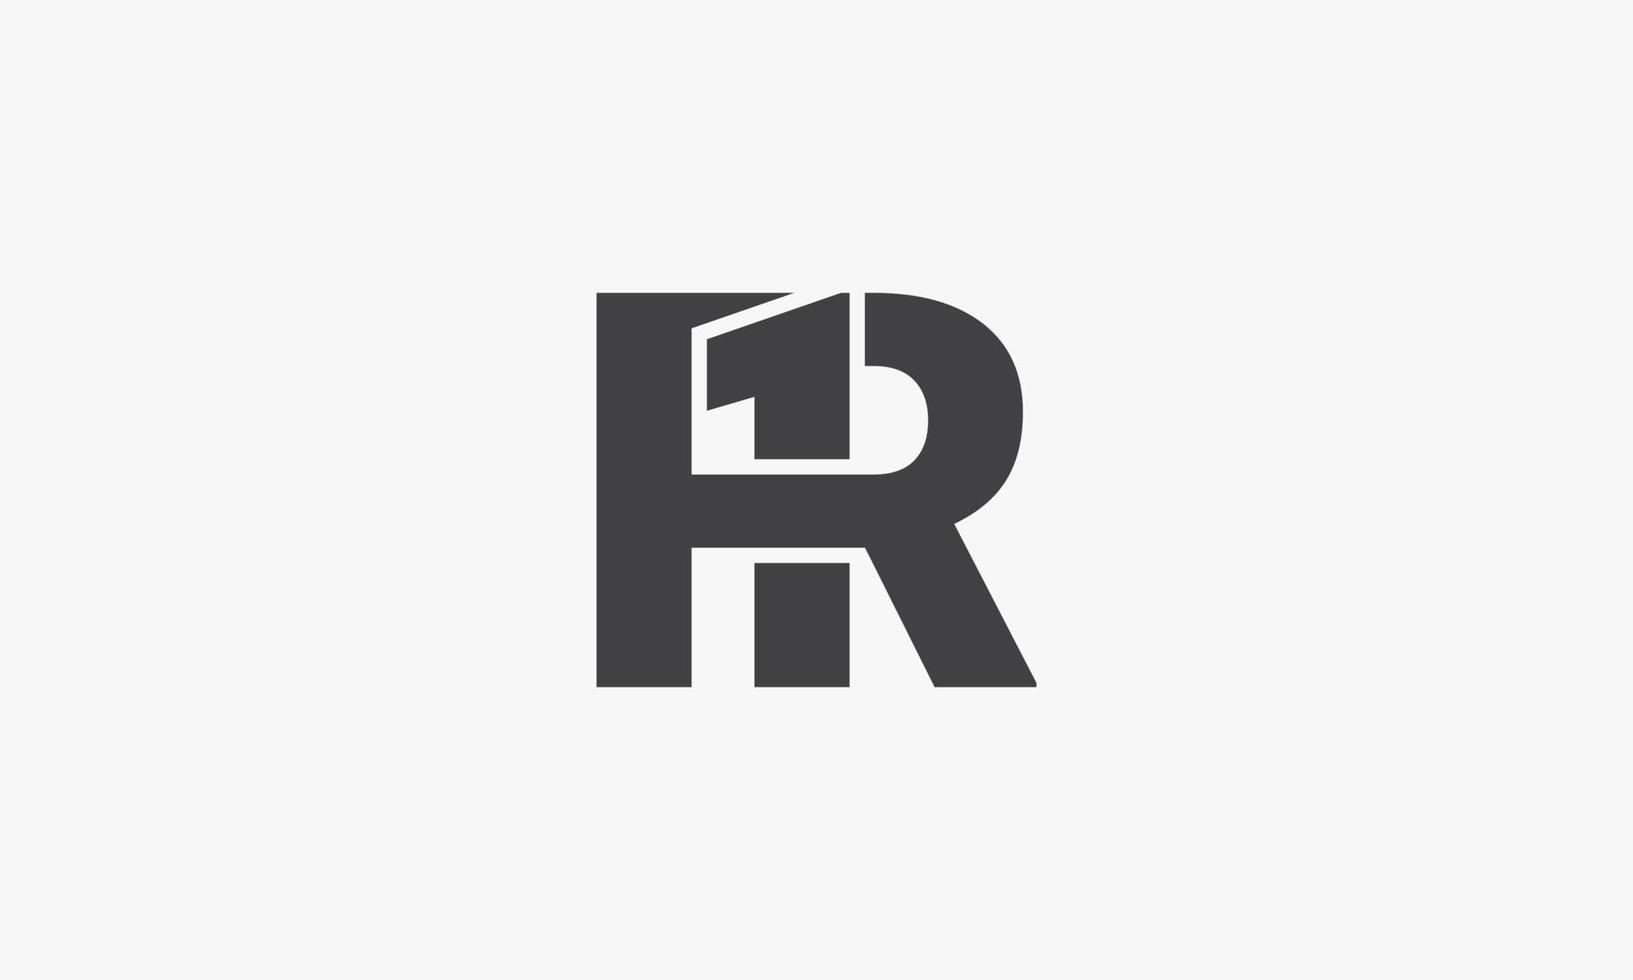 R1 or 1R letter logo concept isolated on white background. vector